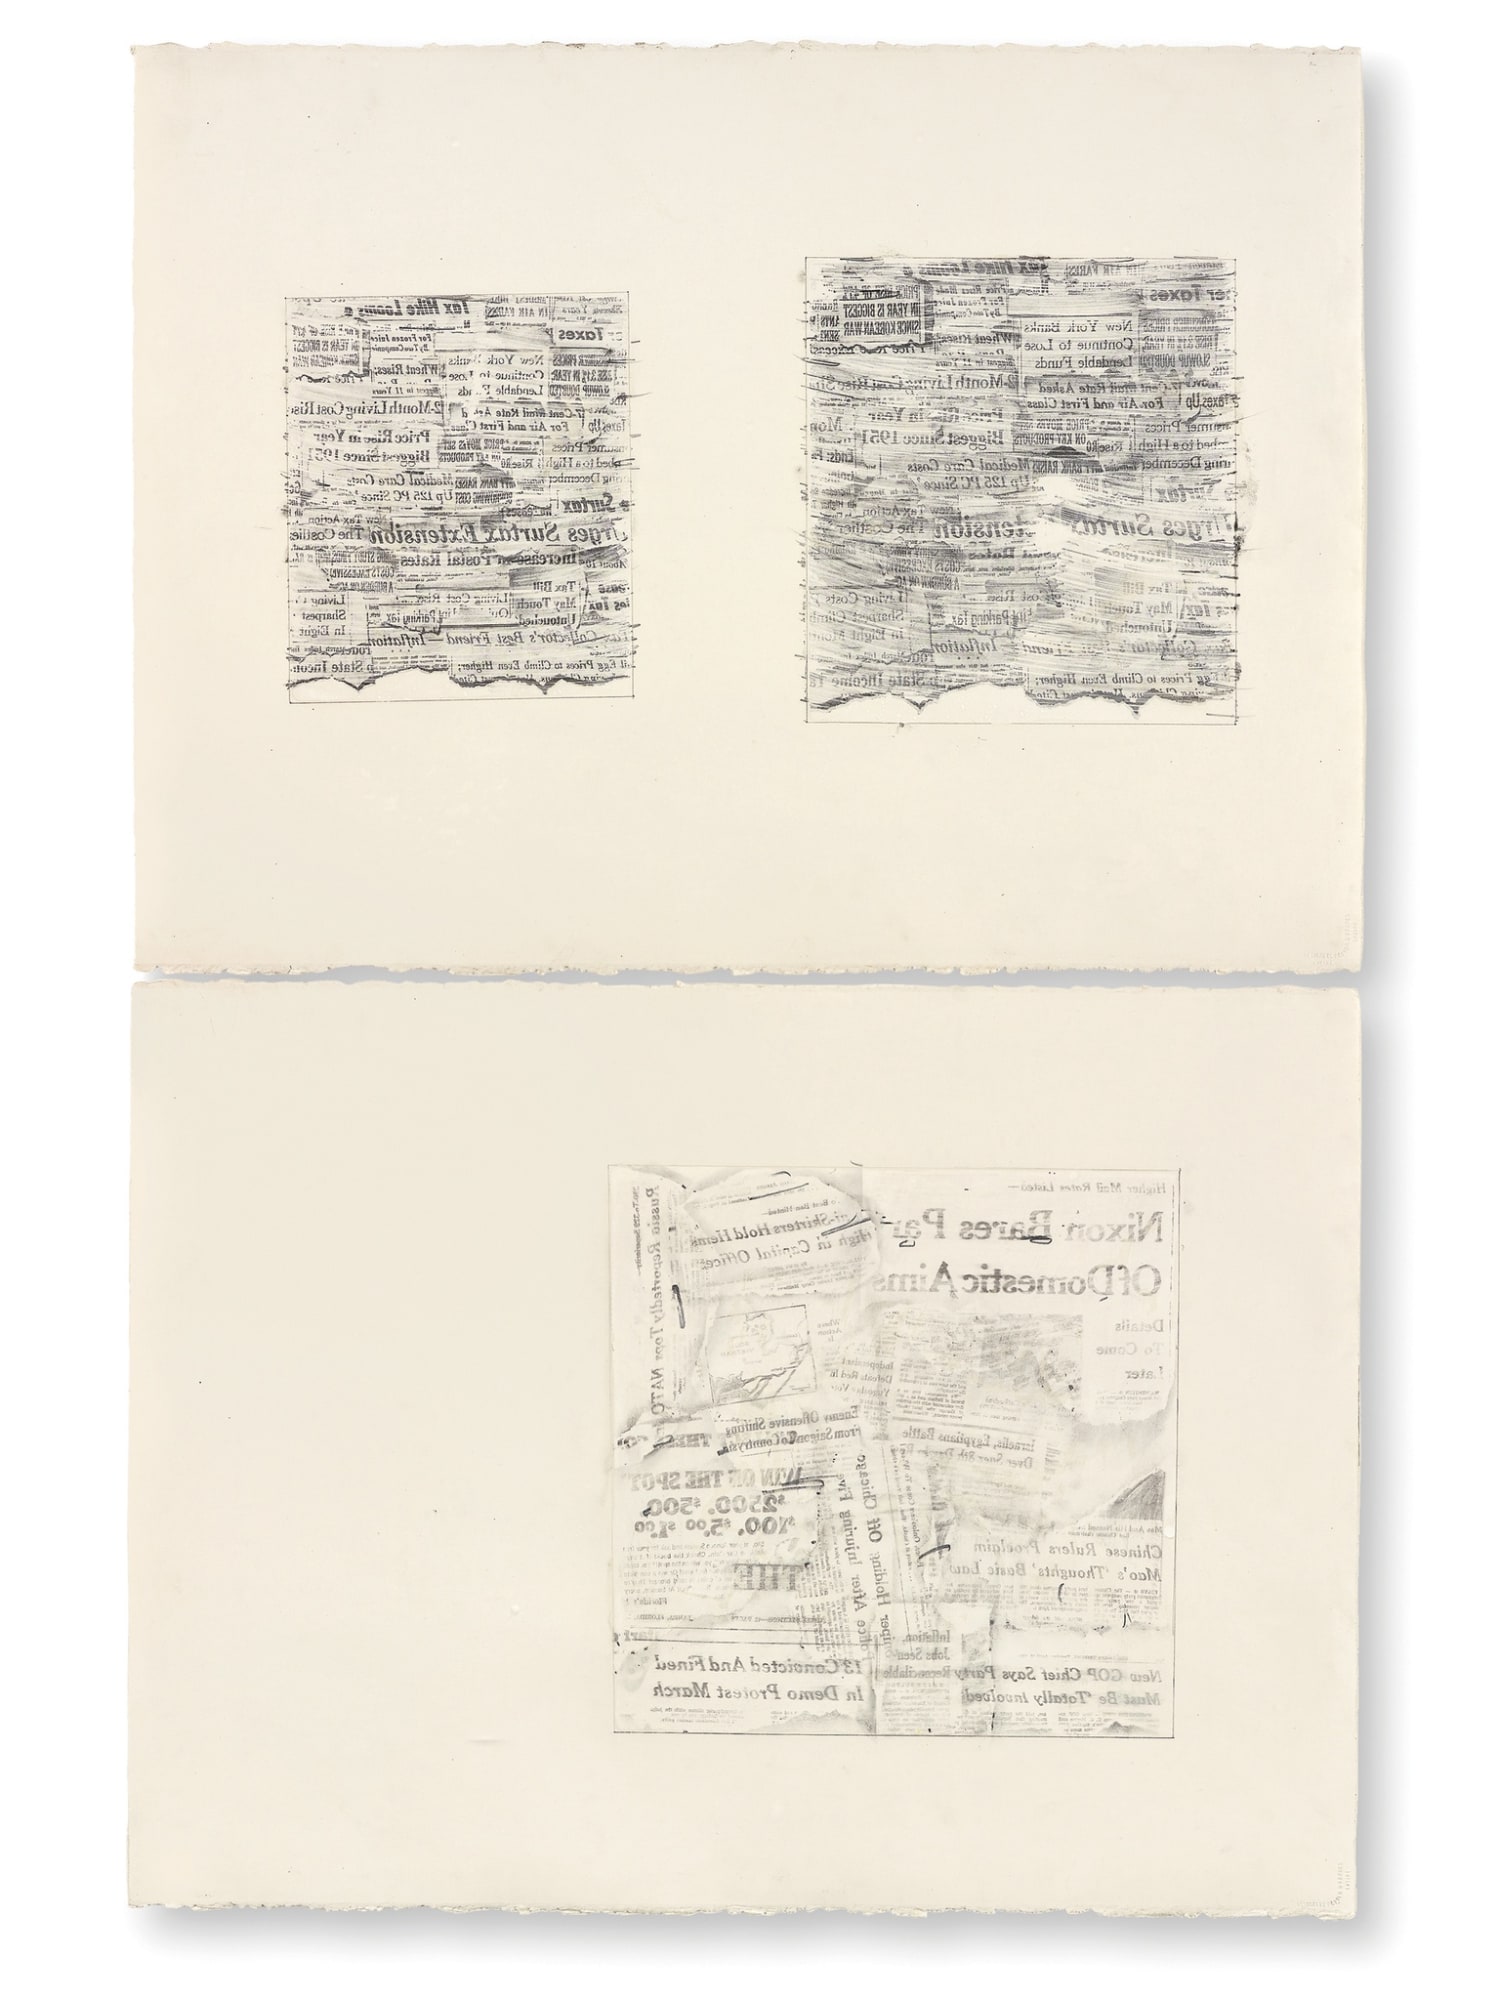 Works - Robert Rauschenberg, Transfer Drawings from the 1950s and 1960s ...